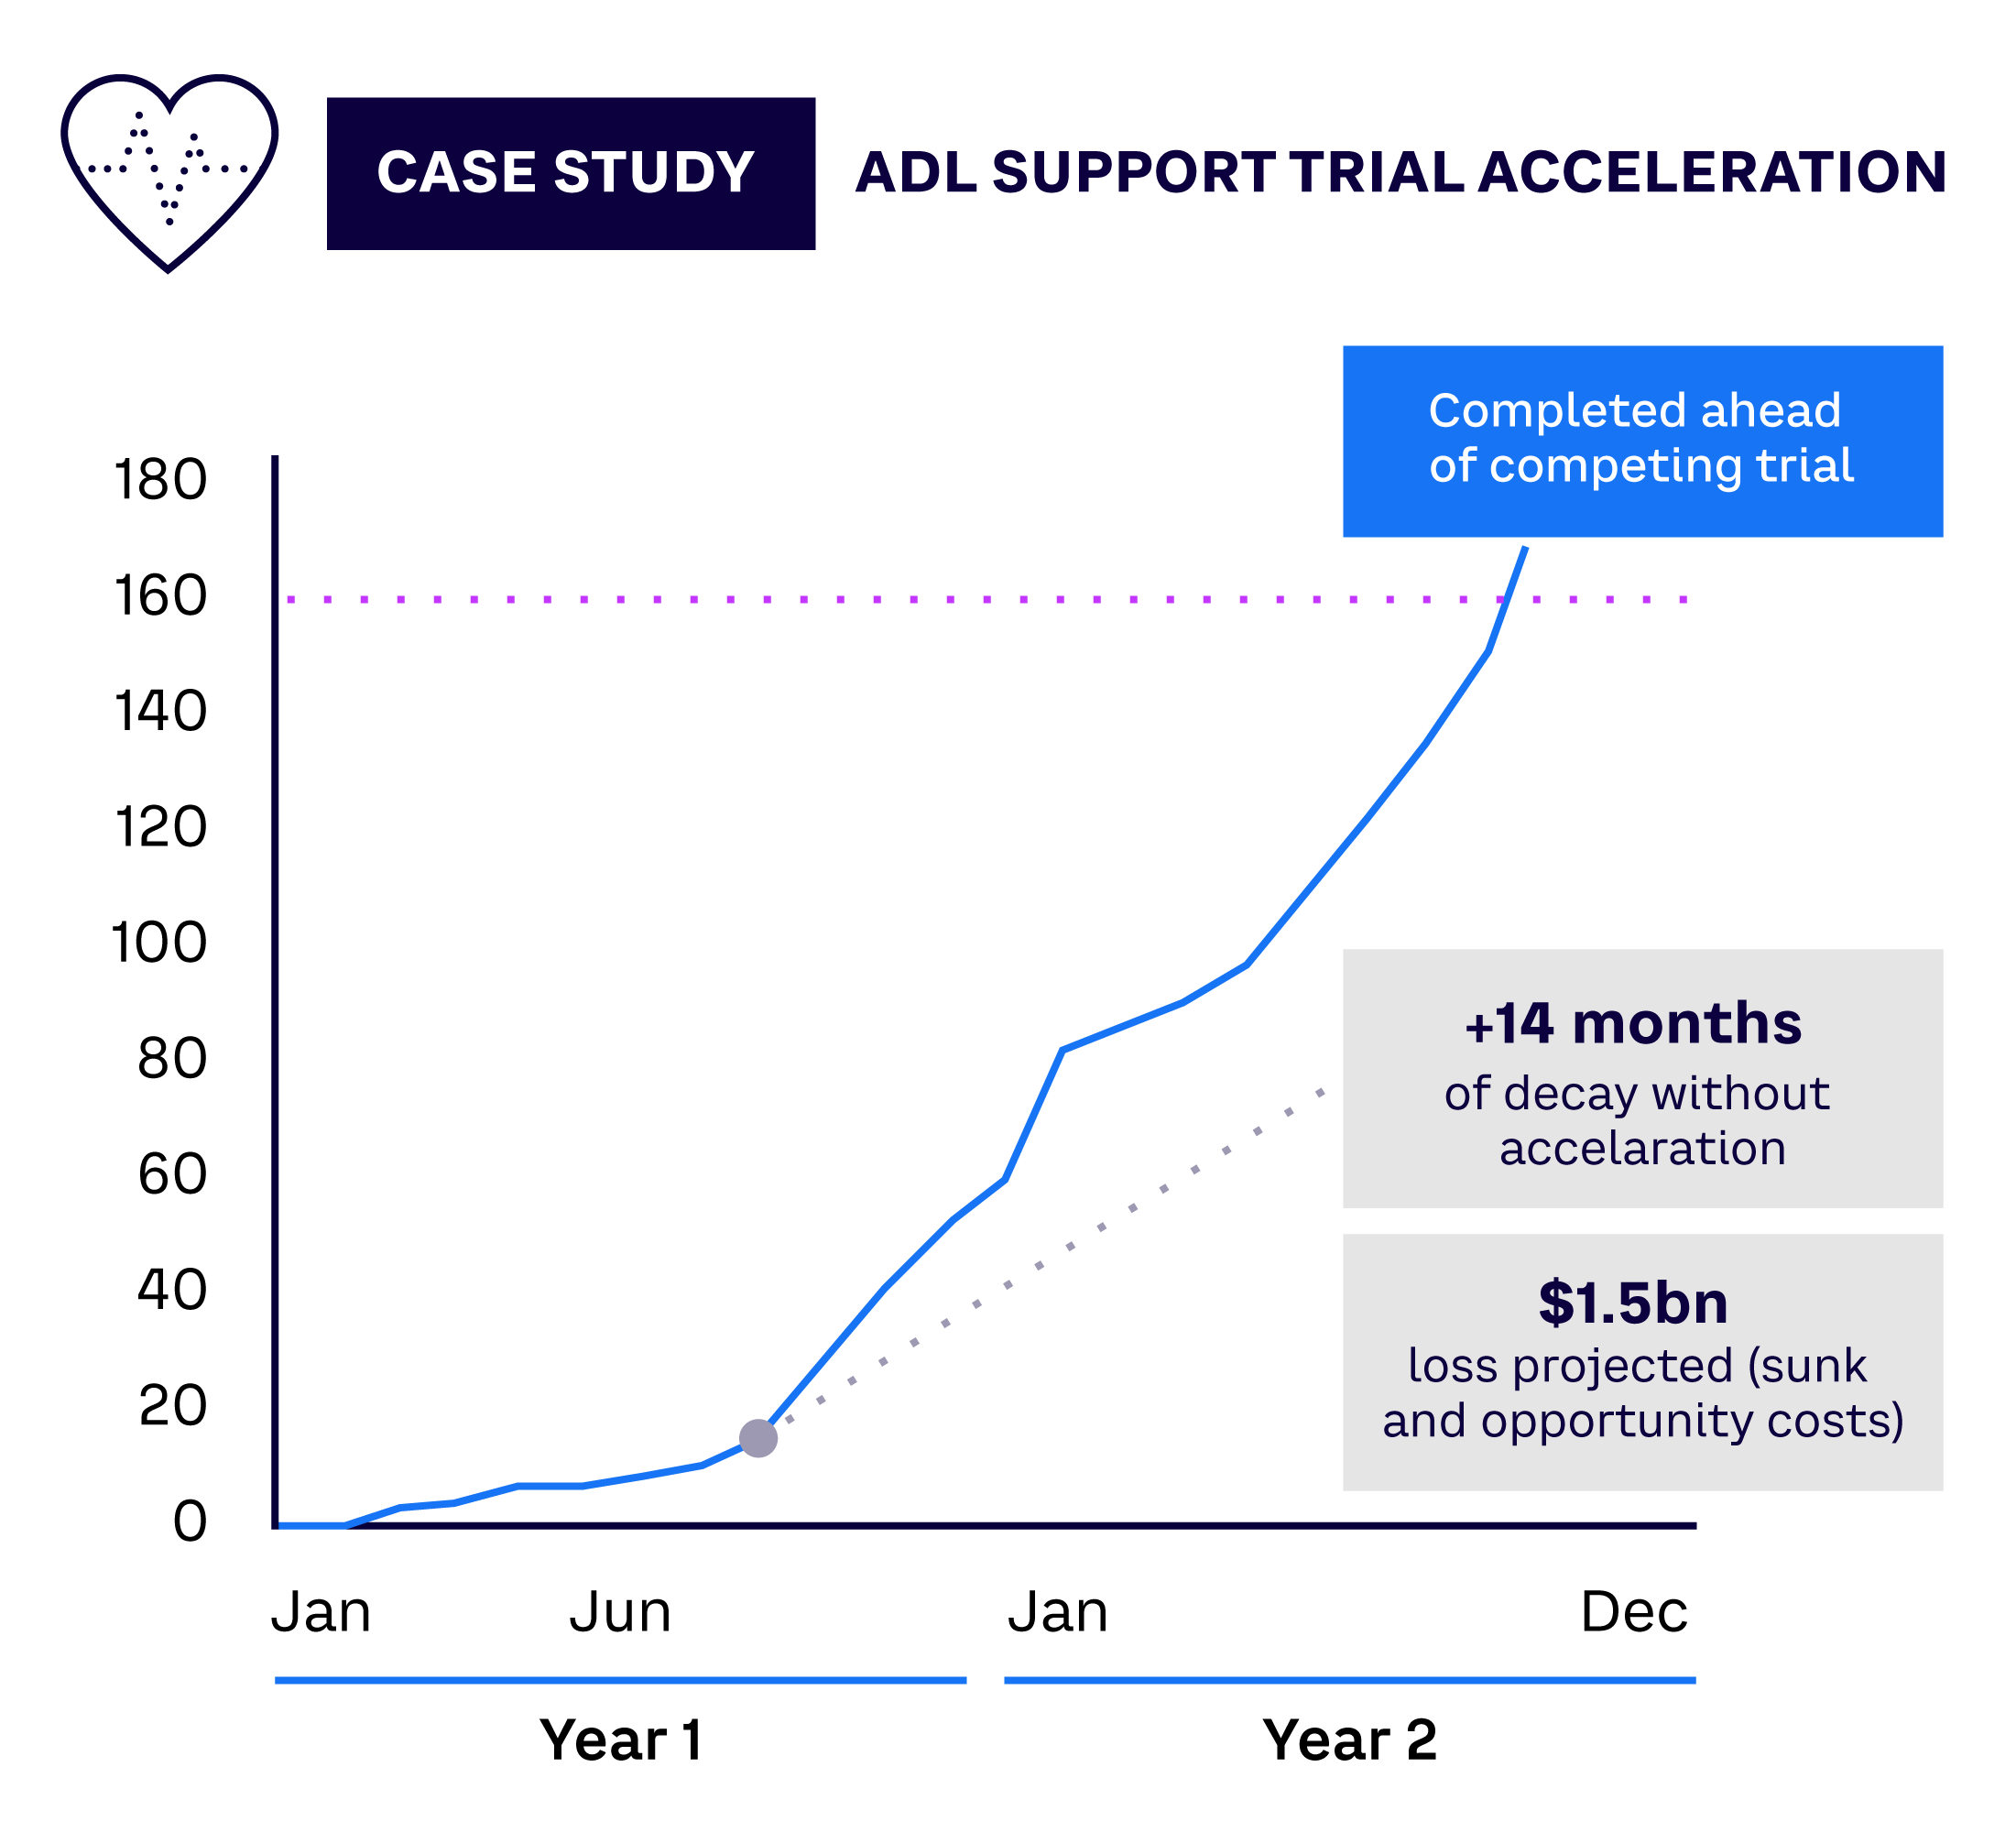 CLINICAL TRIAL ACCELERATION RESULTS